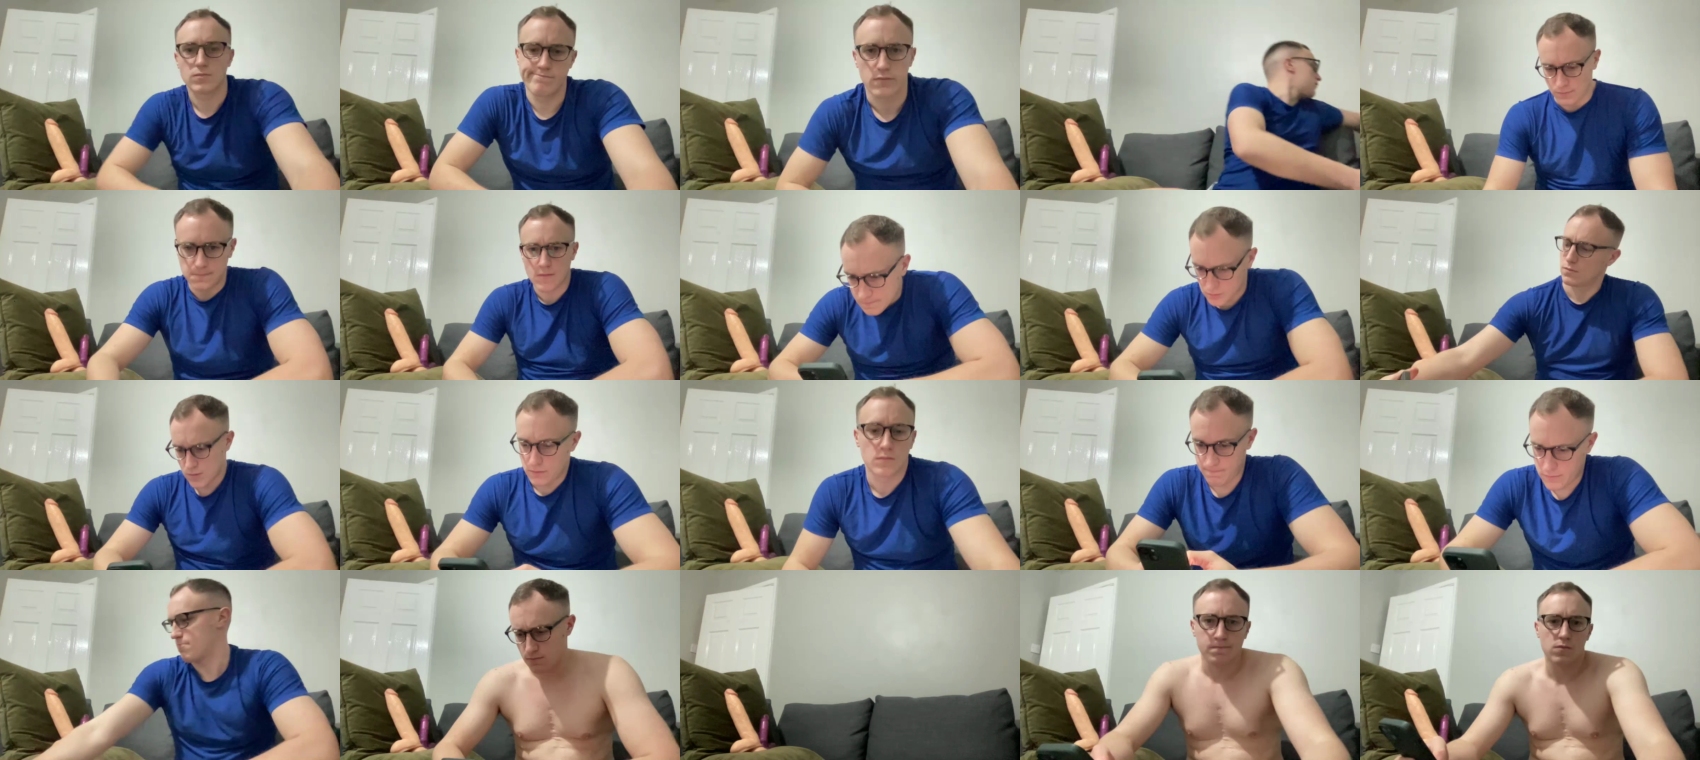 holbyhot1992 gay CAM SHOW @ Chaturbate 02-02-2023